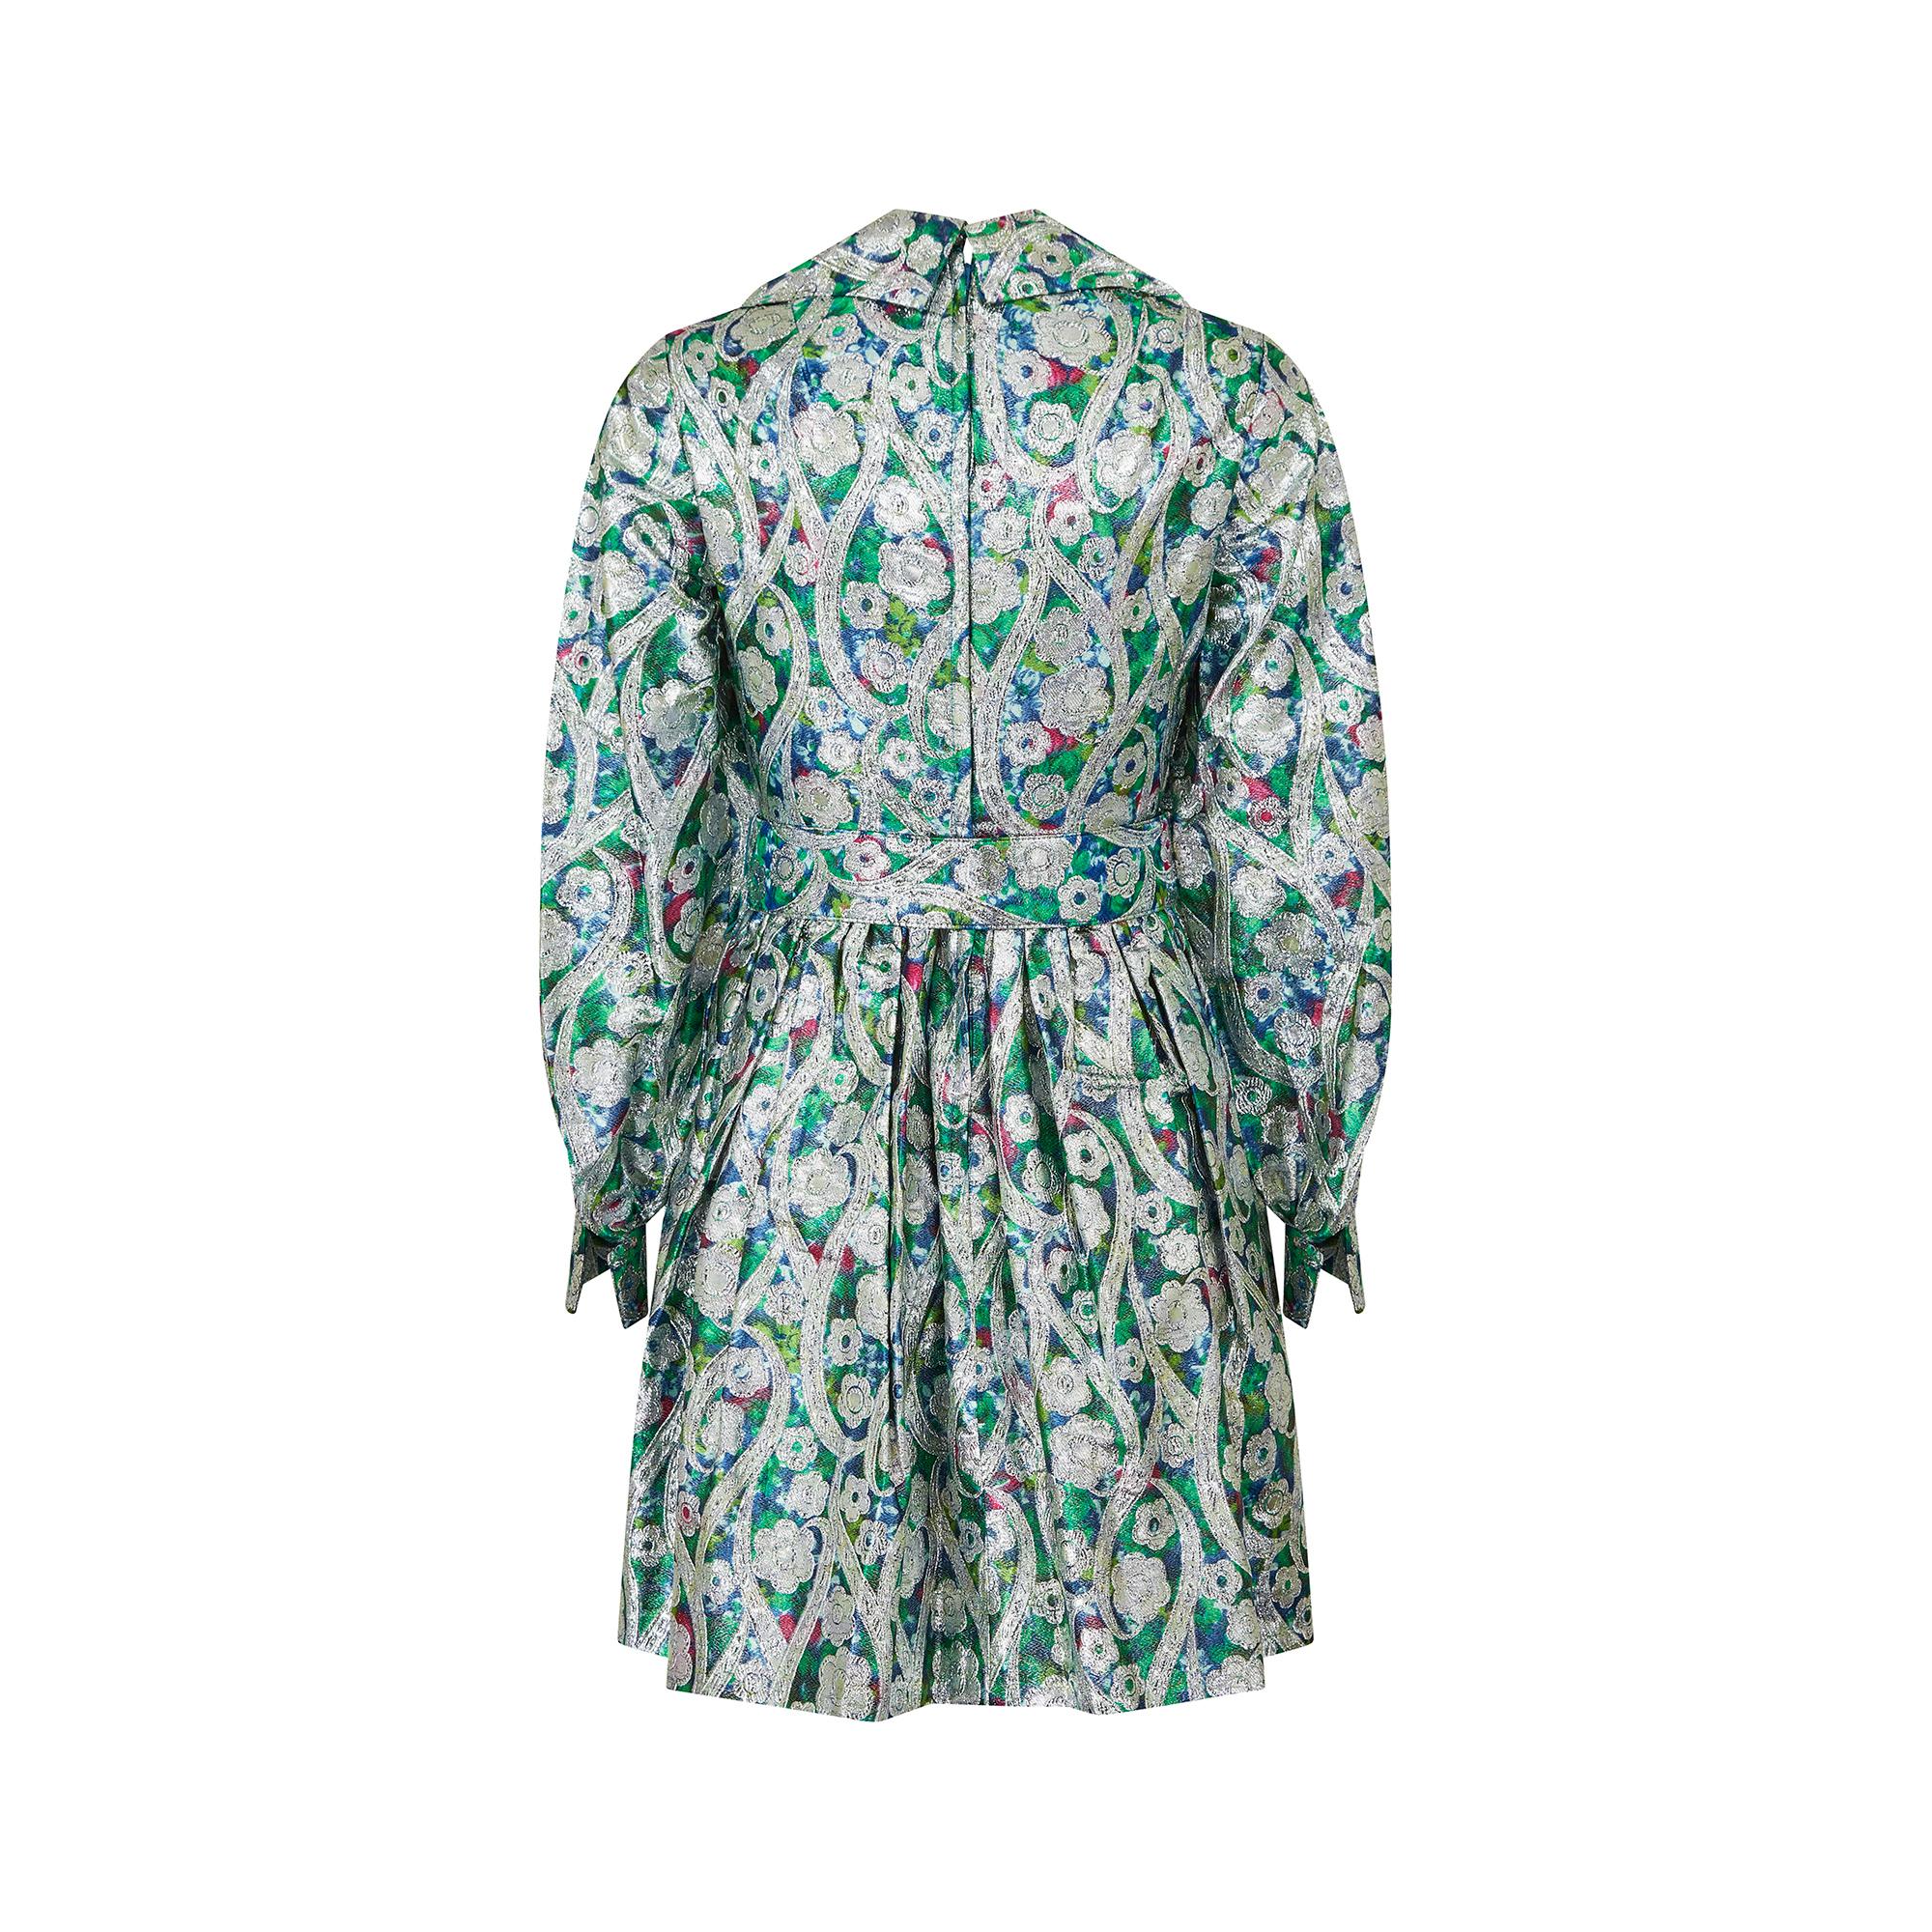 Women's 1970s Colourful Floral and Silver Lame Shirtwaister Dress